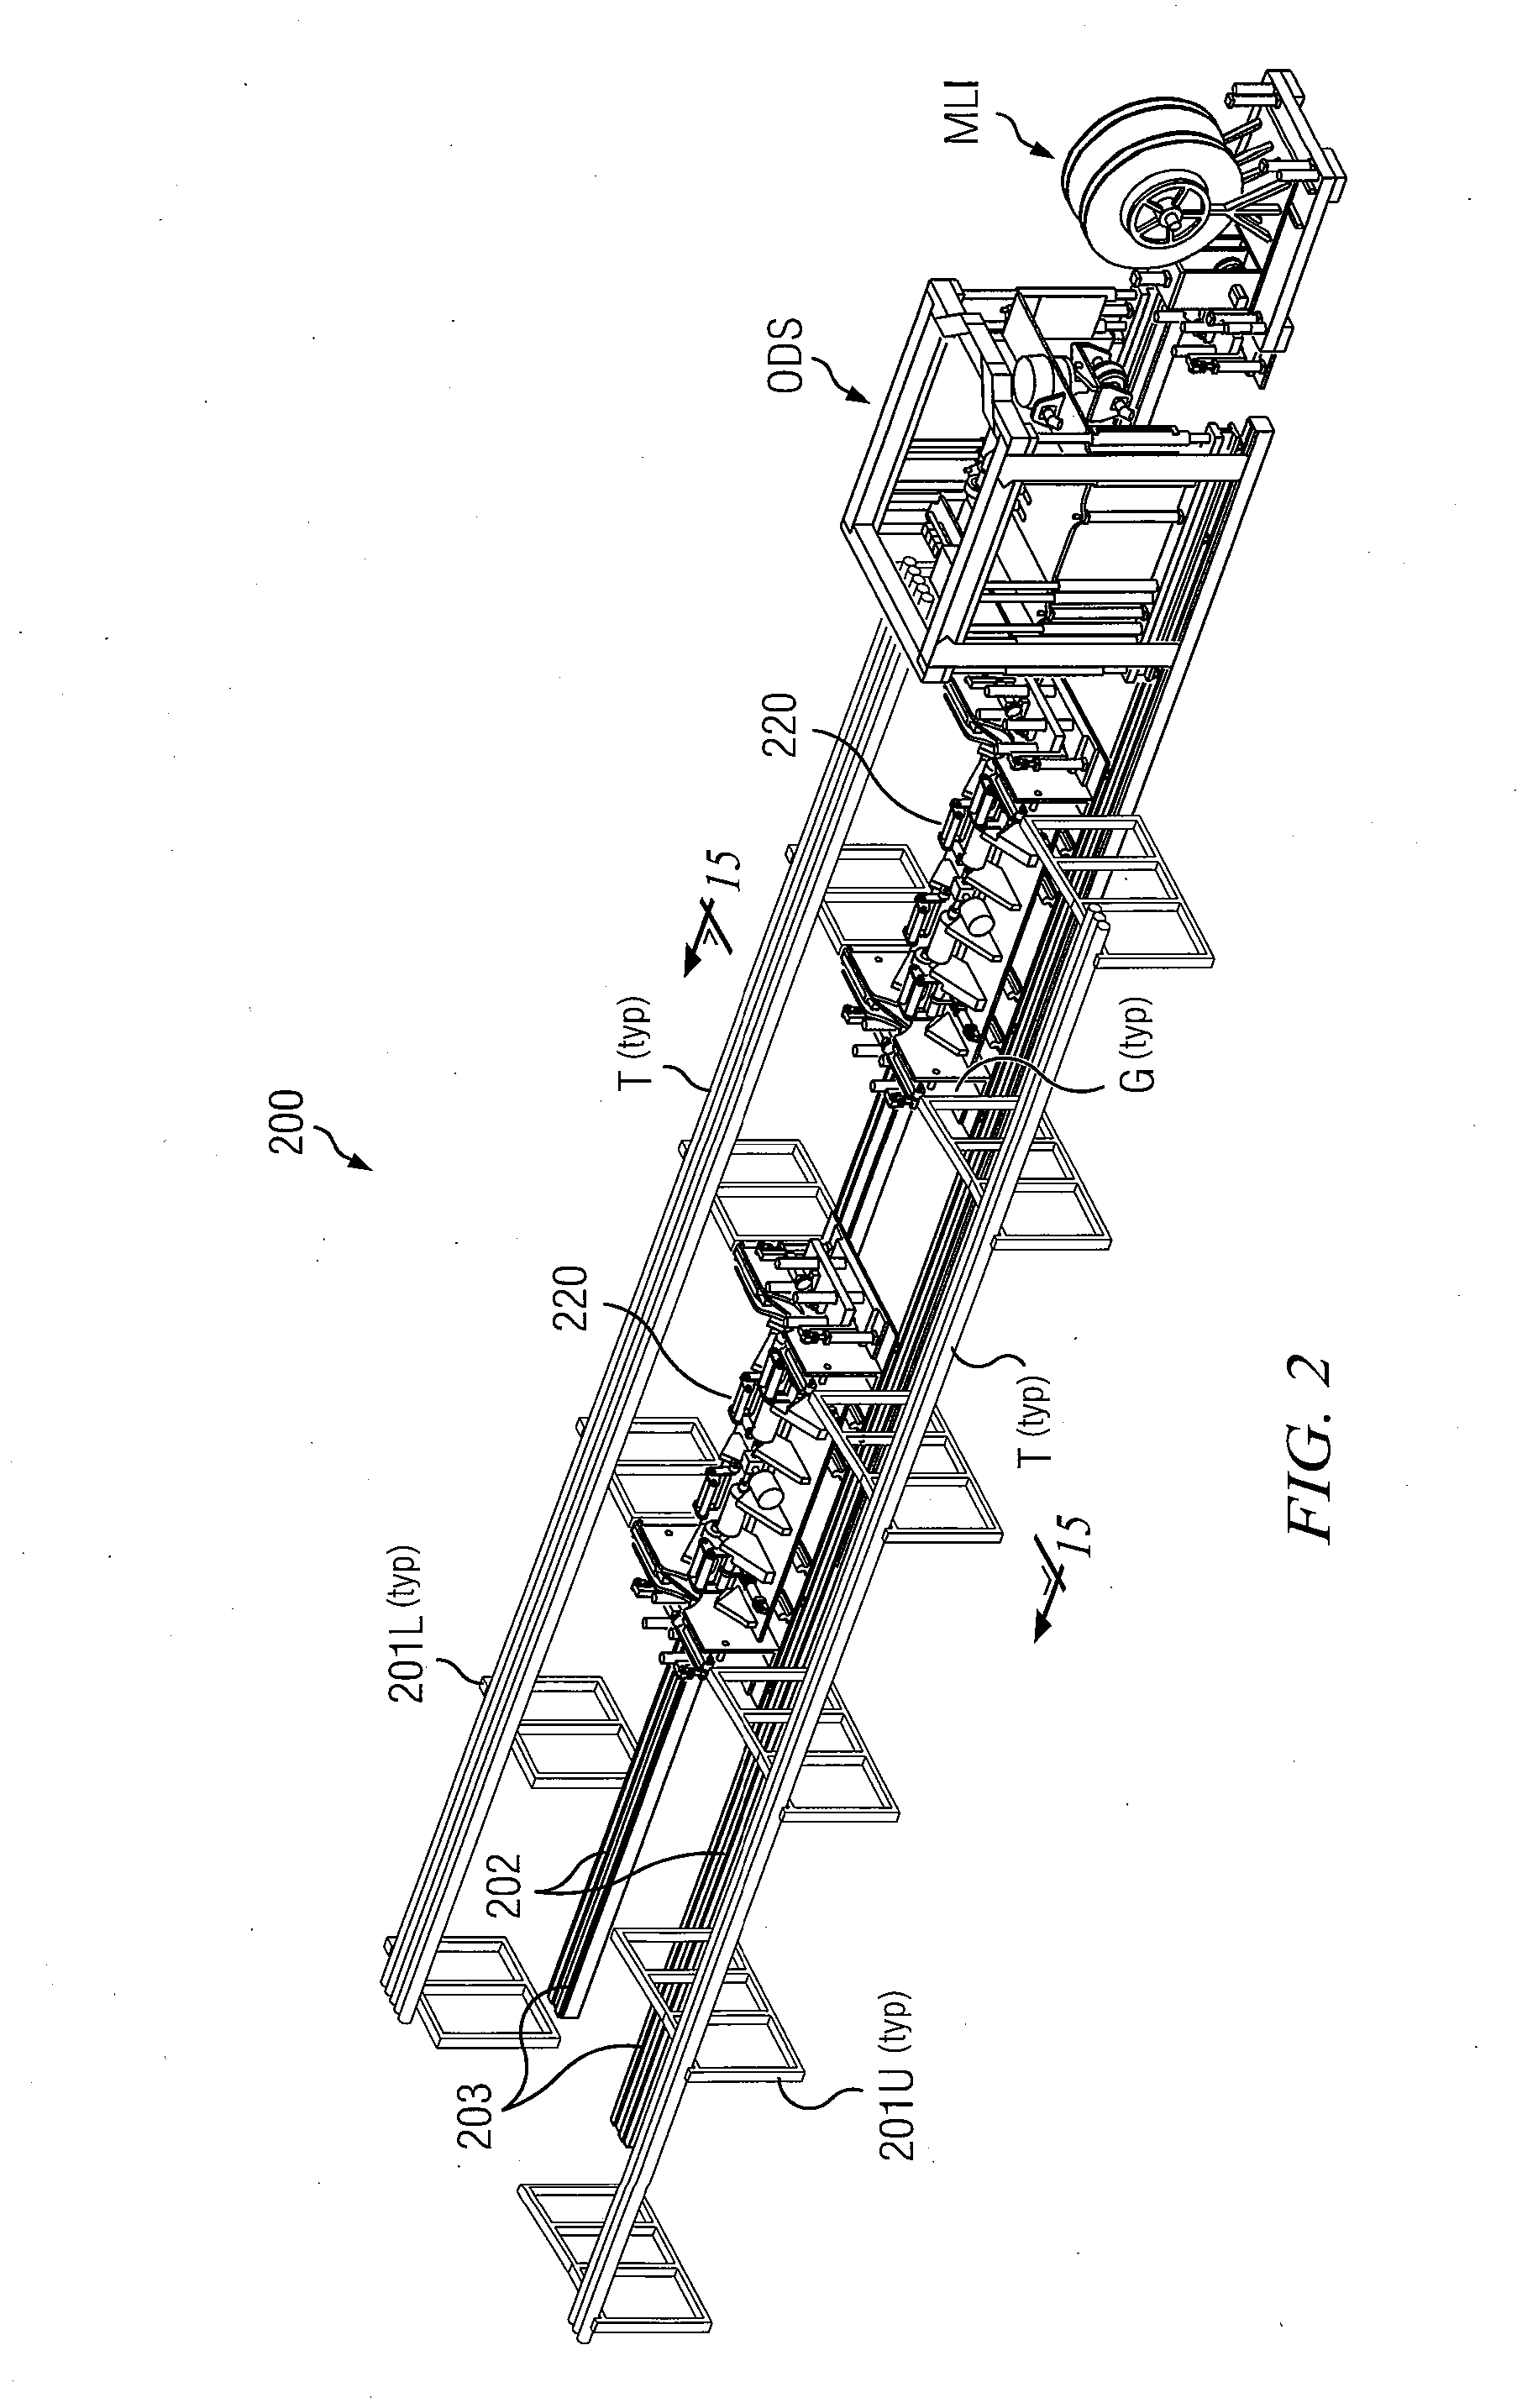 Enhanced methods for handling tubulars useful during cleaning and inspection operations